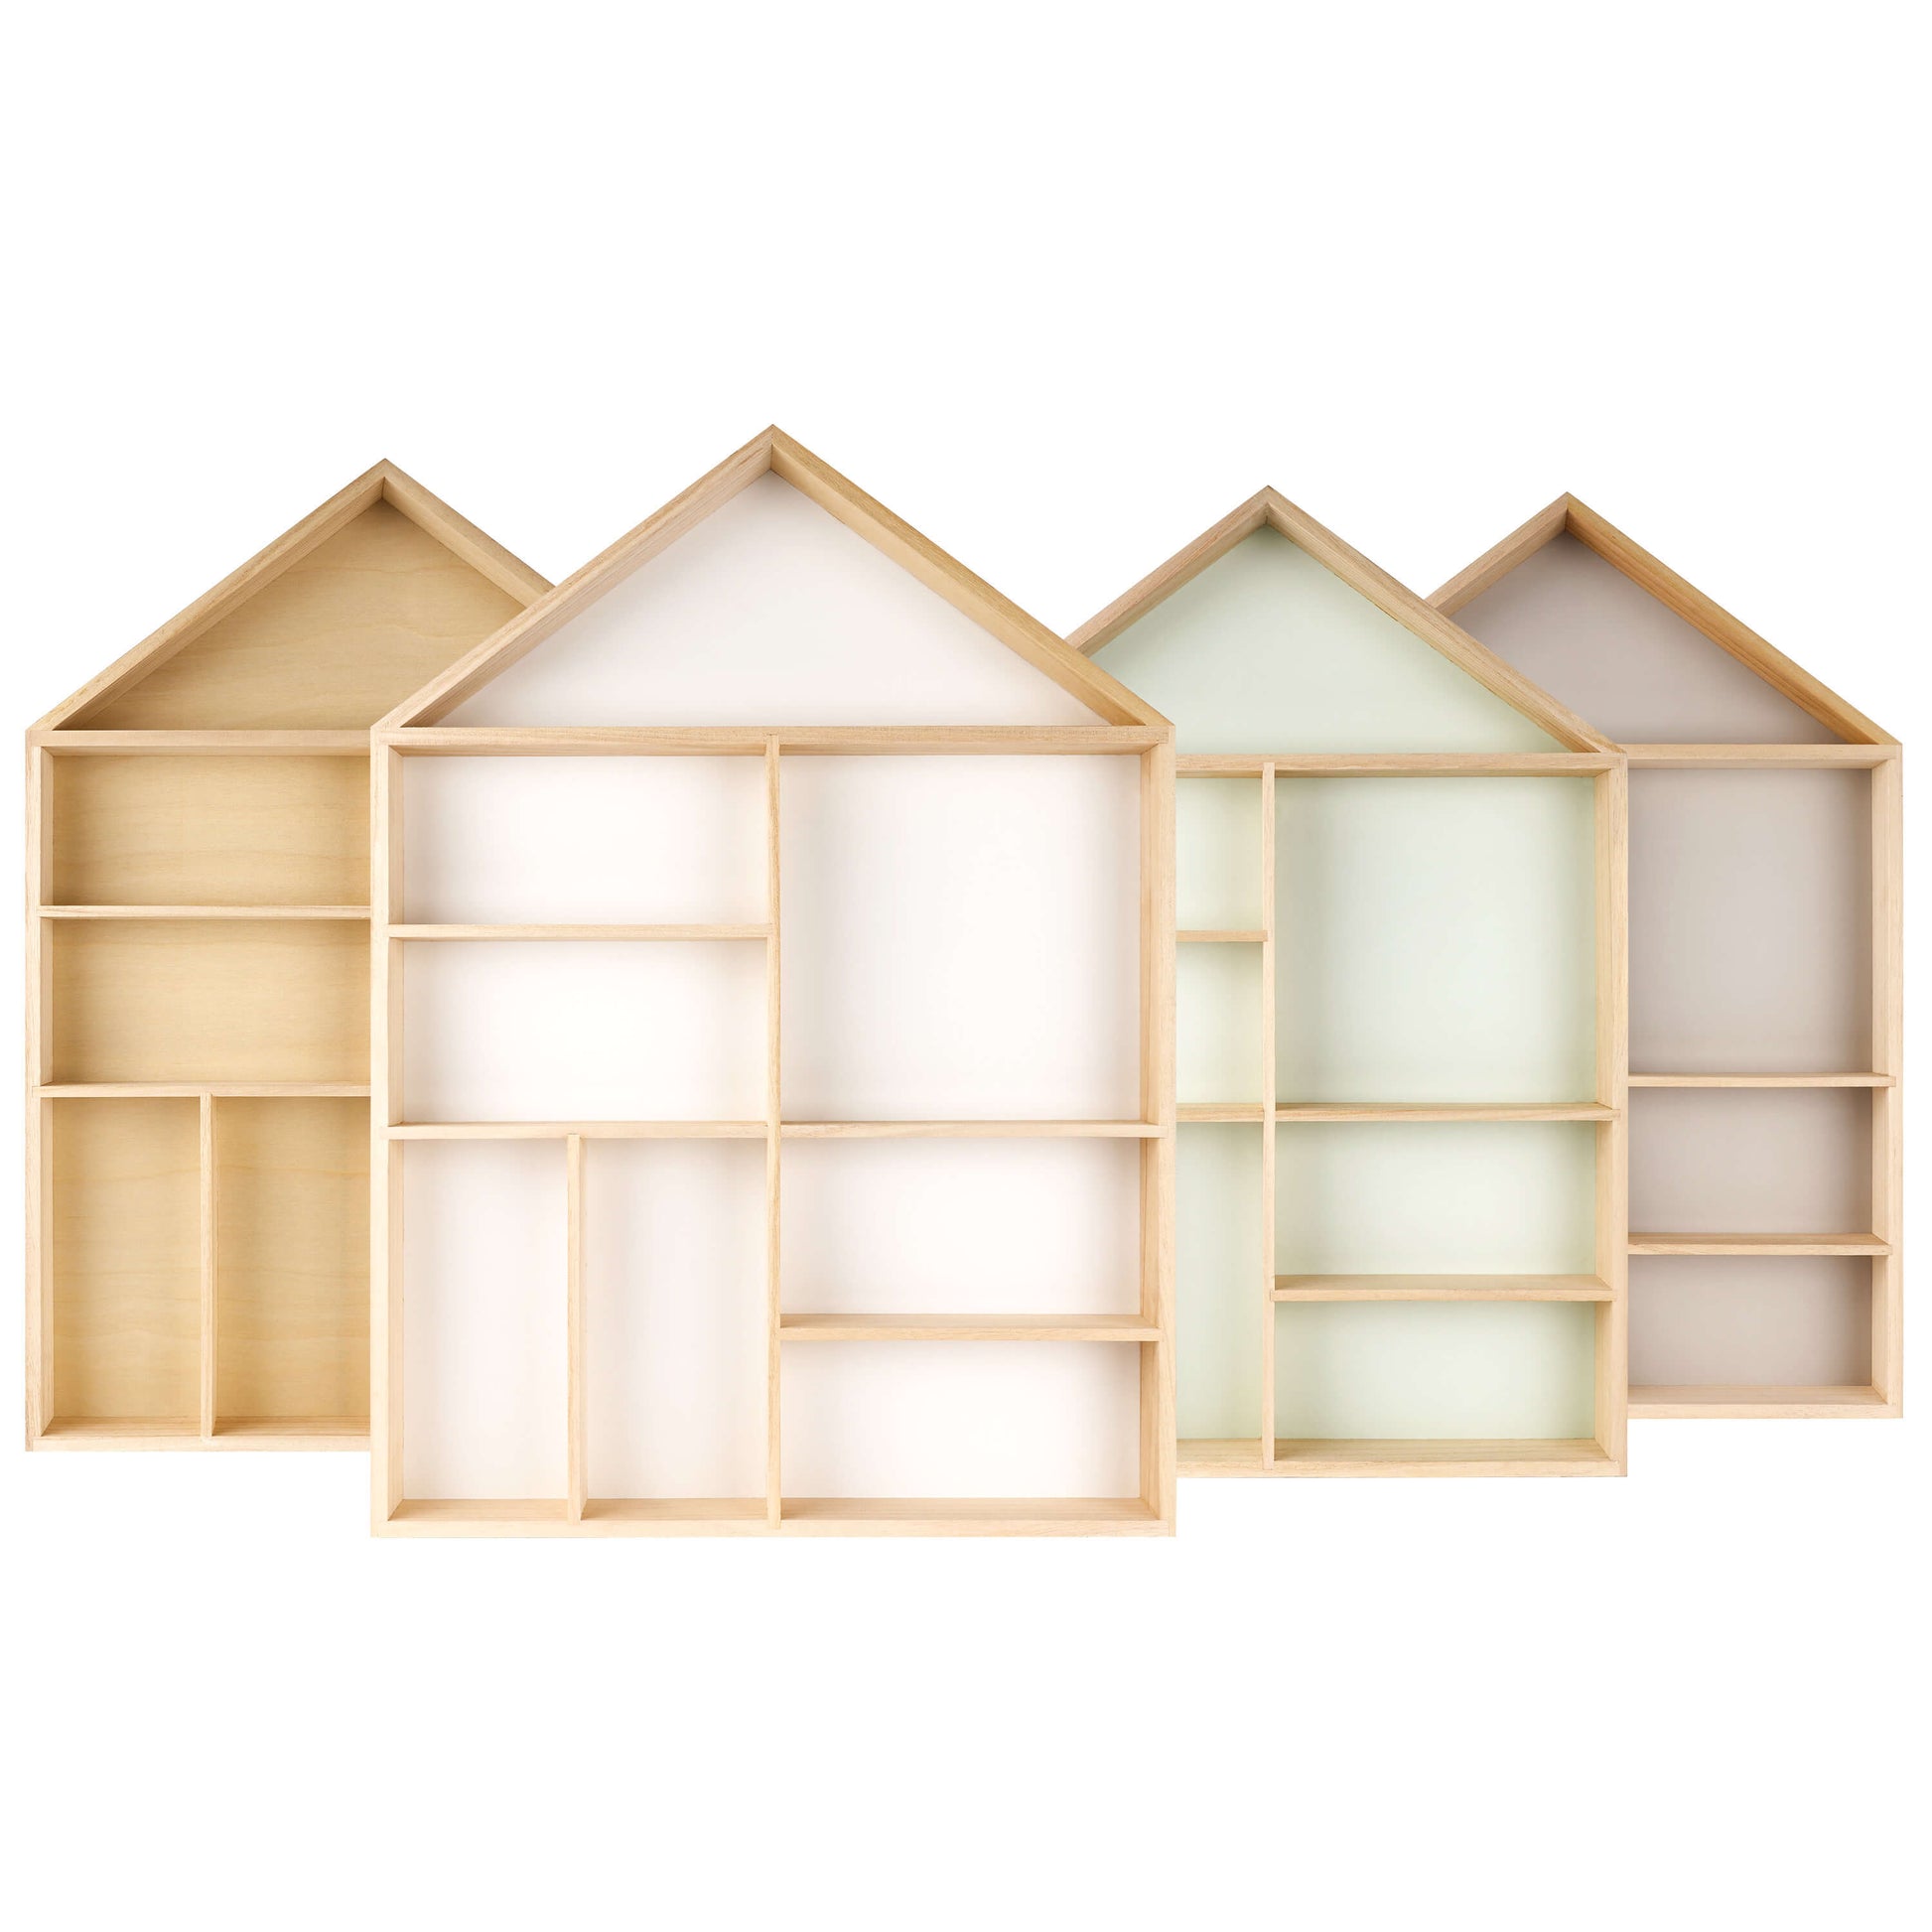 House shaped wooden toy display shelf - all color variations displayed side by side (side view)